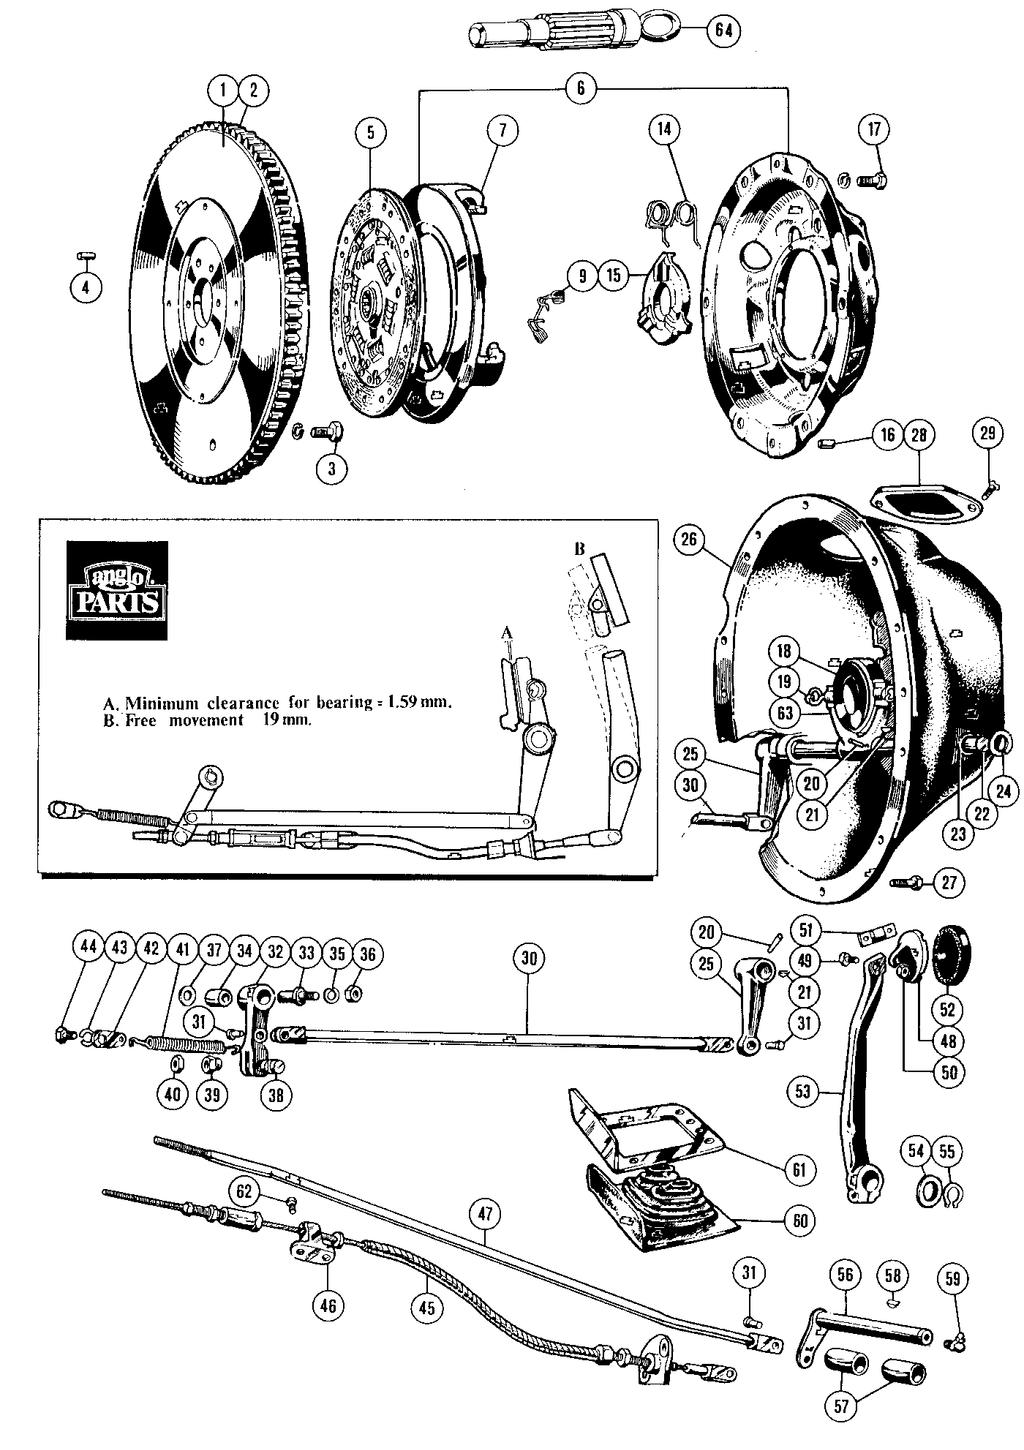 MGTD-TF 1949-1955 - Pedals, footrests & plates - Clutch & components - 1